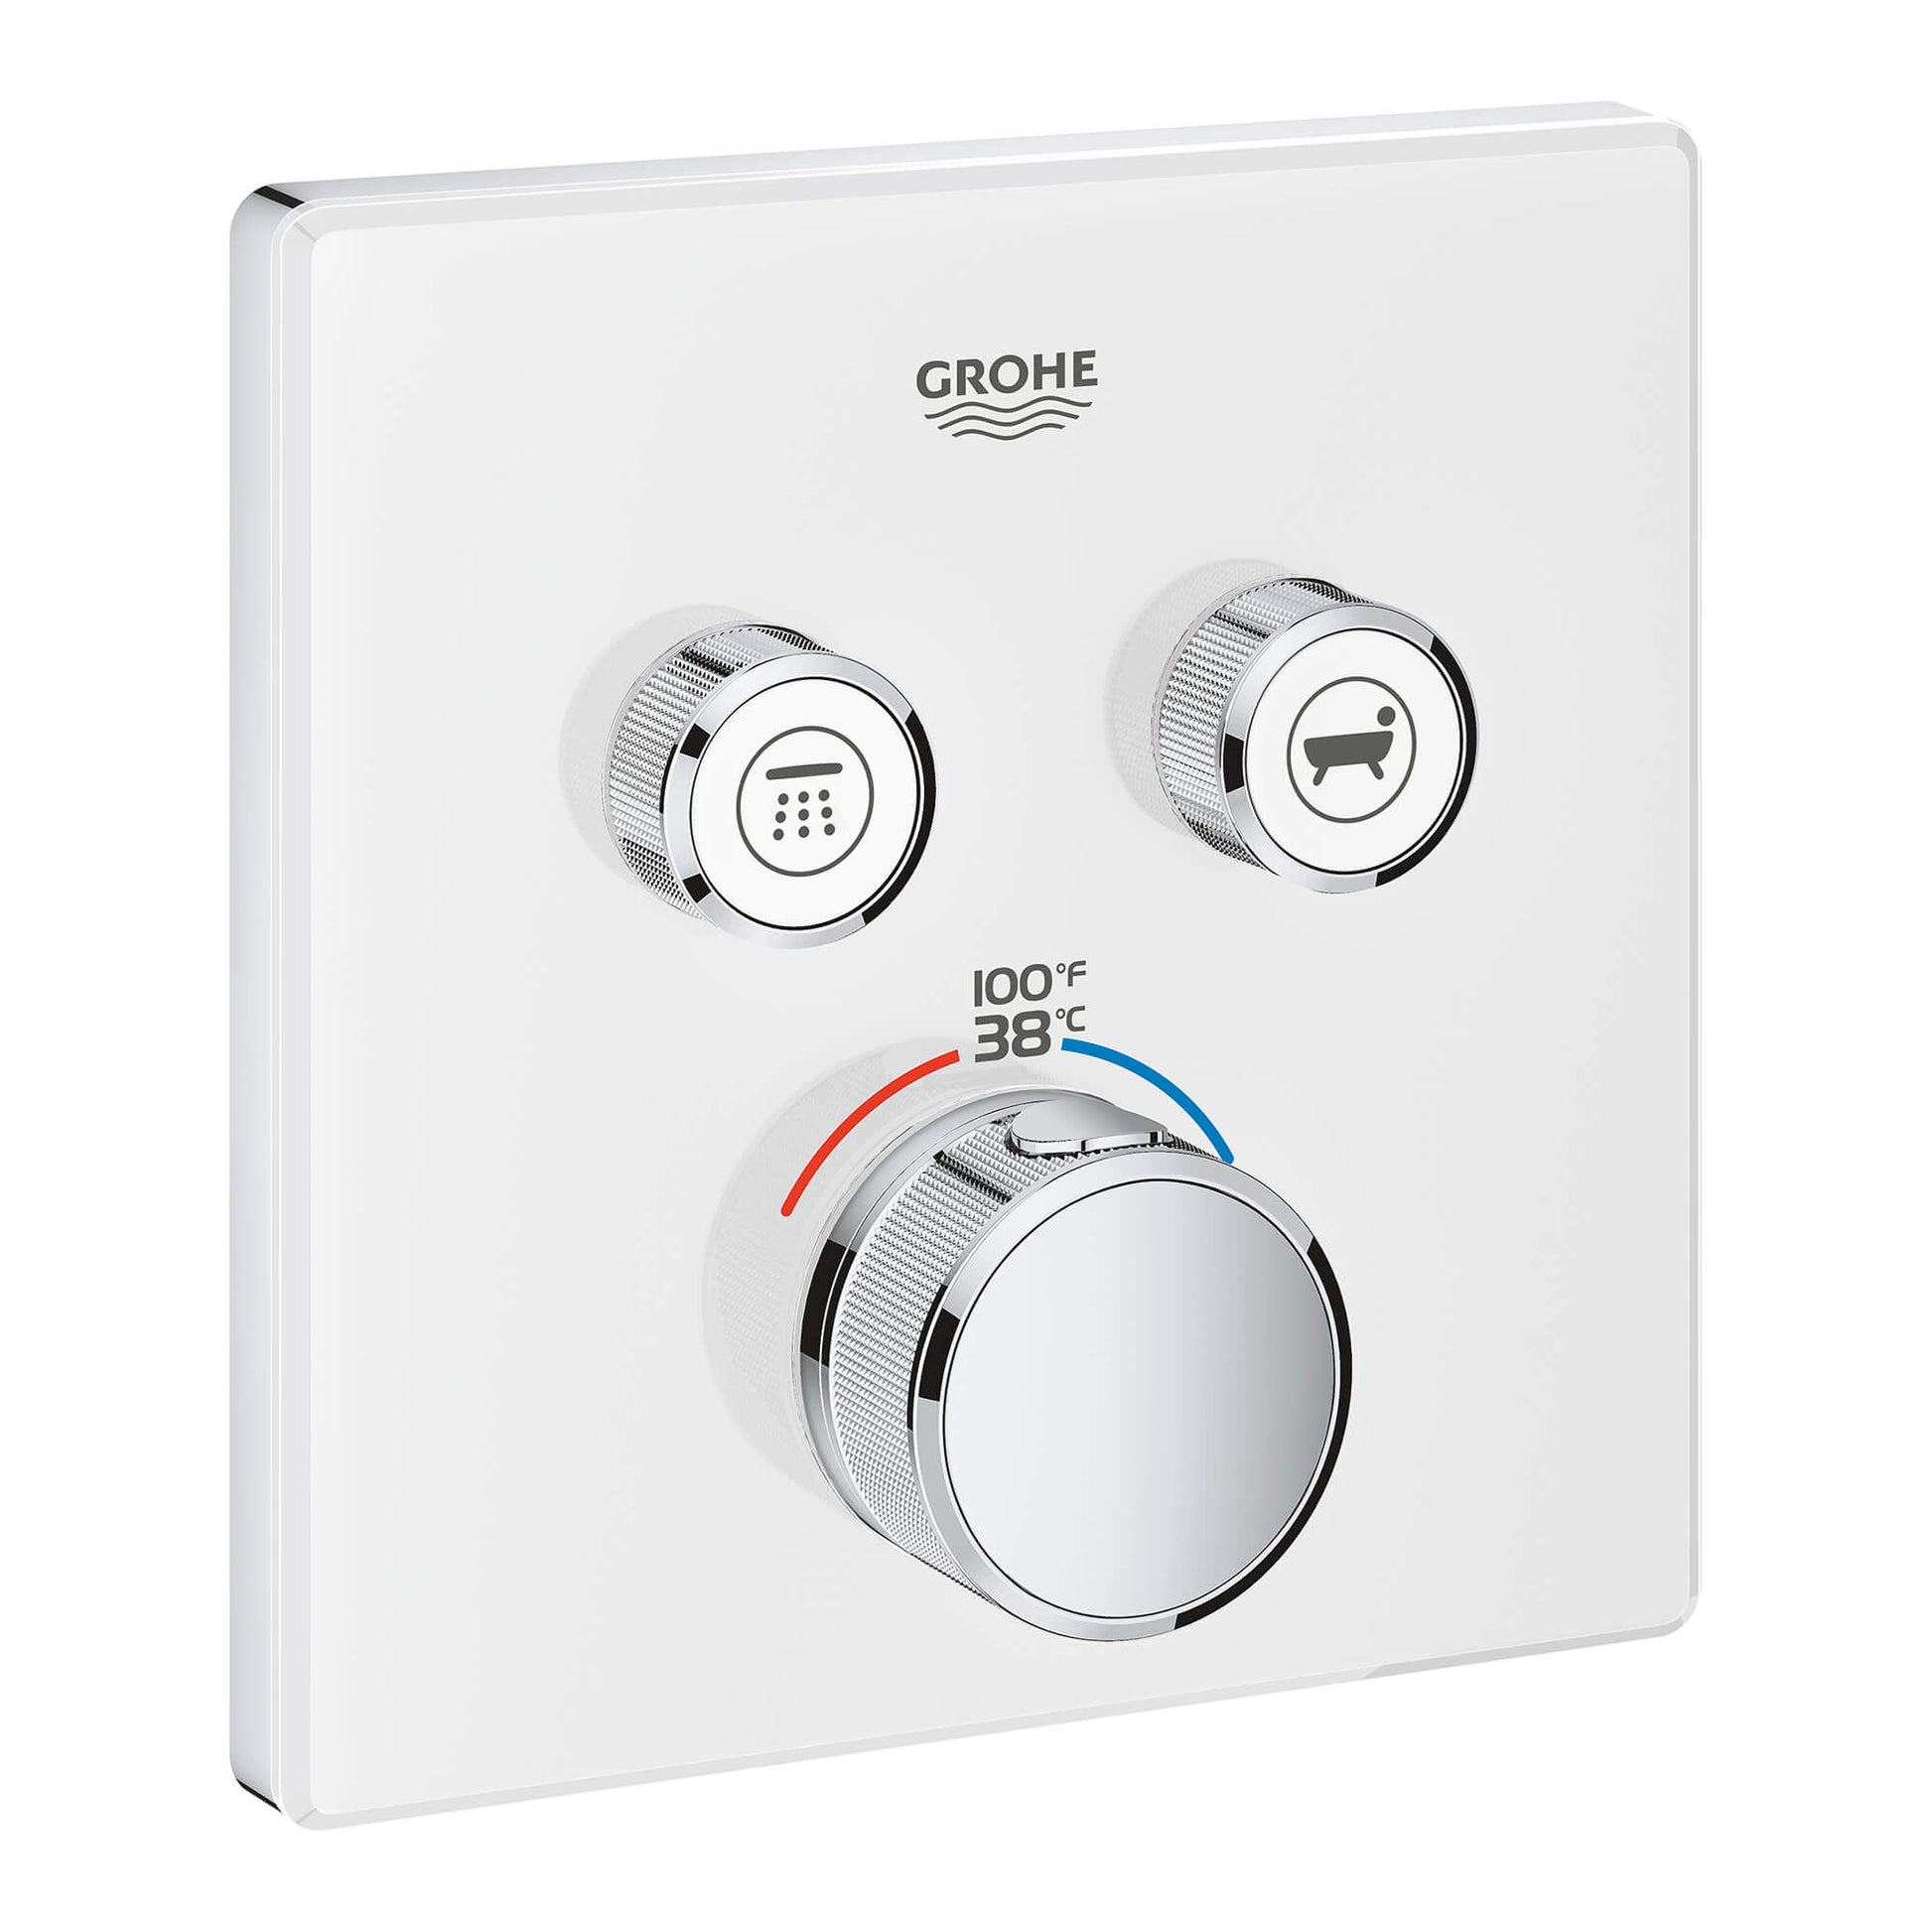 GROHE 29164LS0 Grohtherm Moon White Dual Function Thermostatic Valve Trim